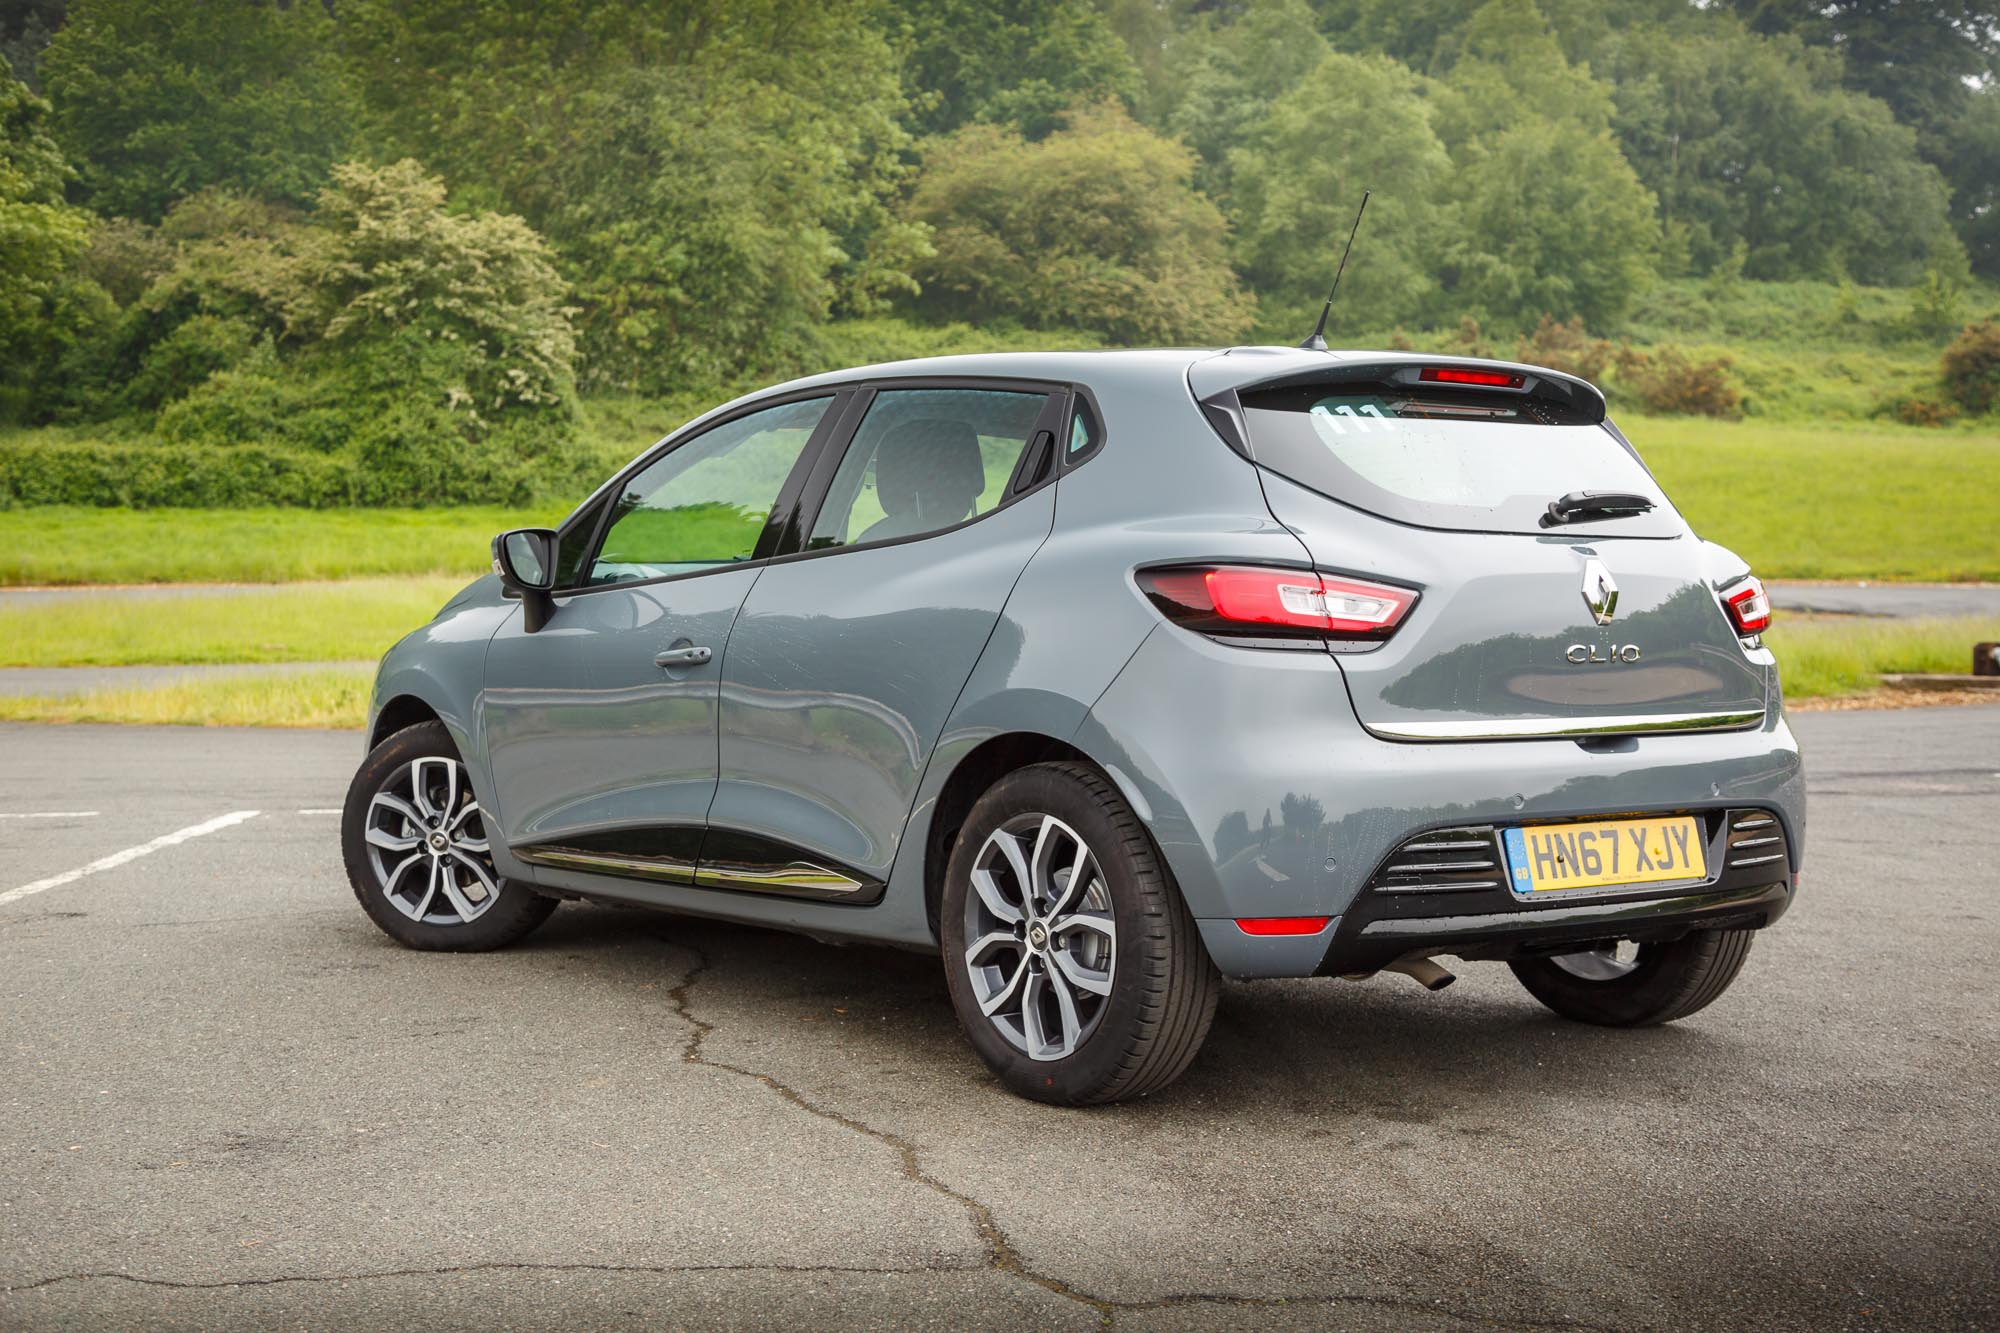 2018 Renault Clio Urban Nav Tce 90 5 Speed Manual Review